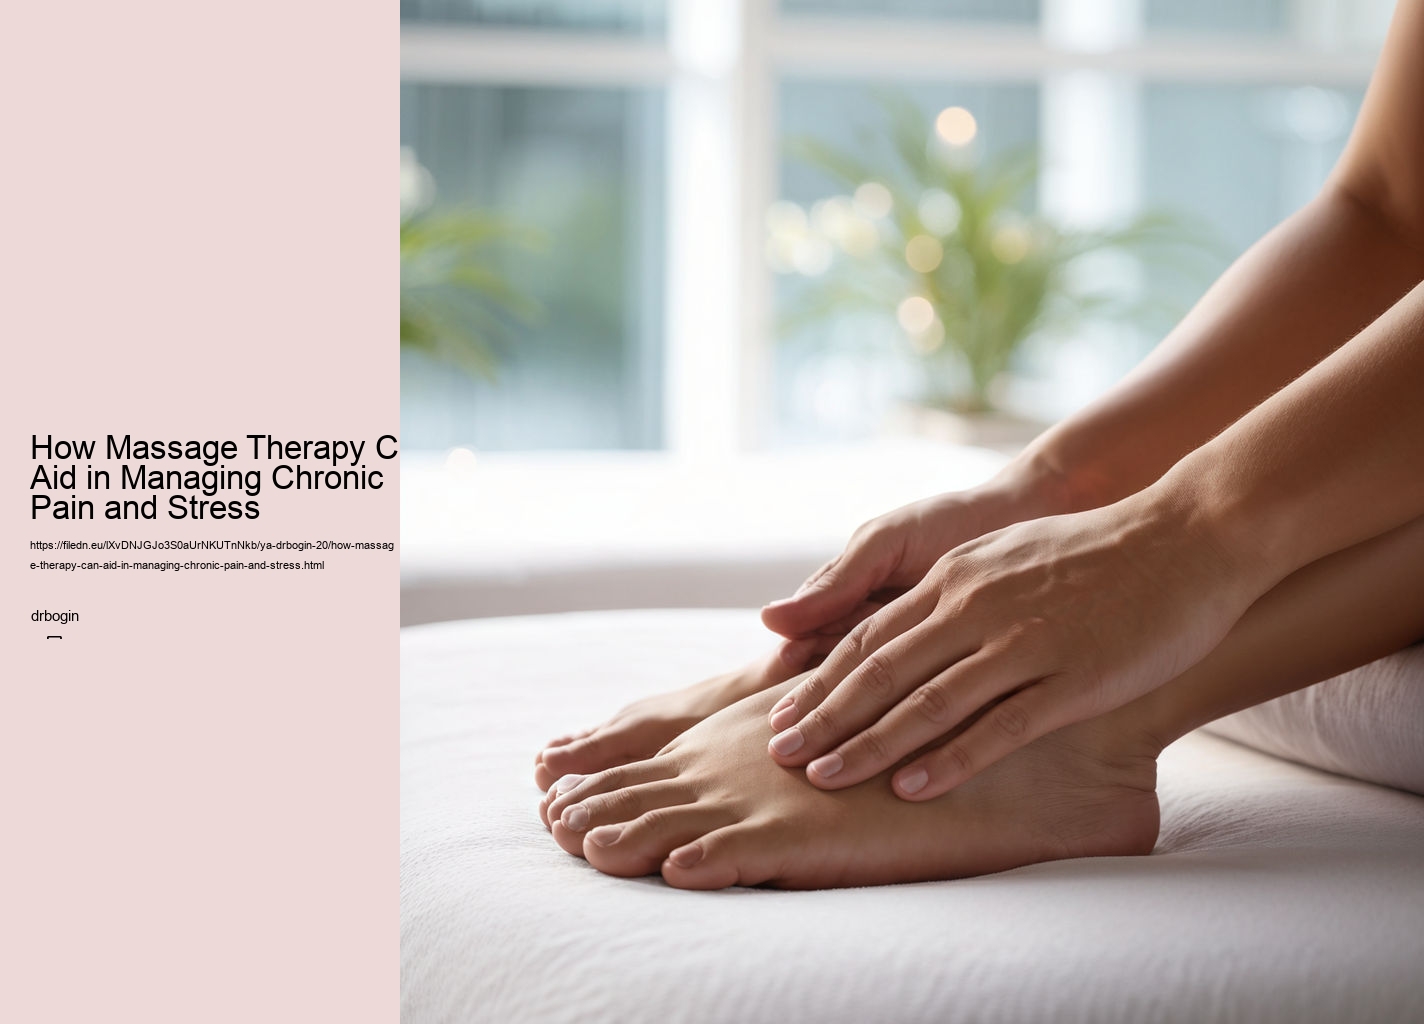 How Massage Therapy Can Aid in Managing Chronic Pain and Stress